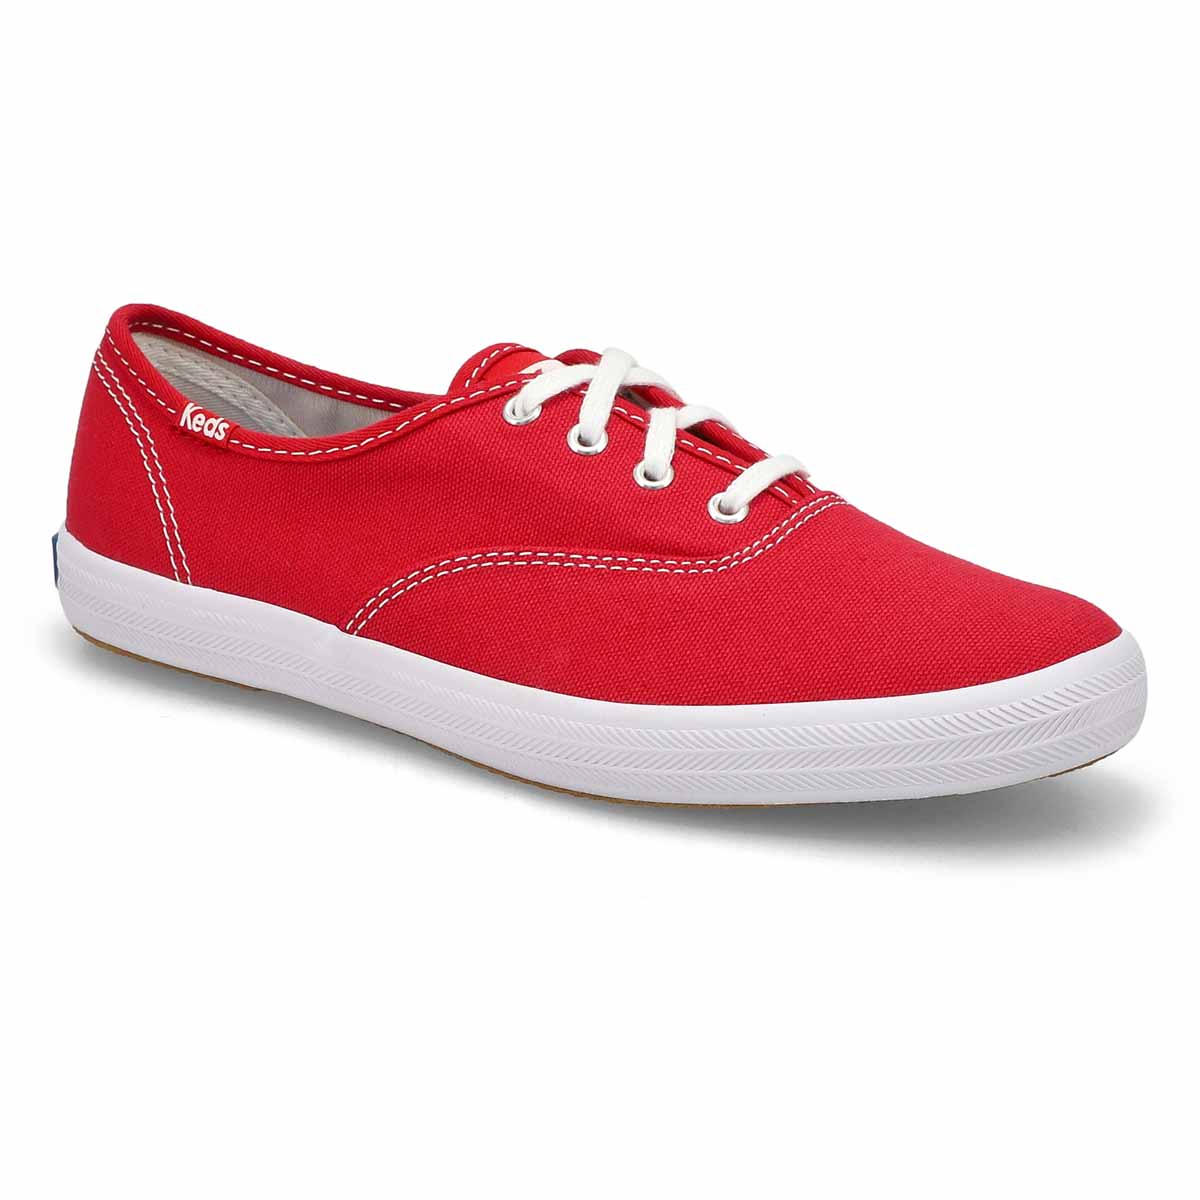 Keds Women's Champion Extra Wide Sneakers - B | SoftMoc.com